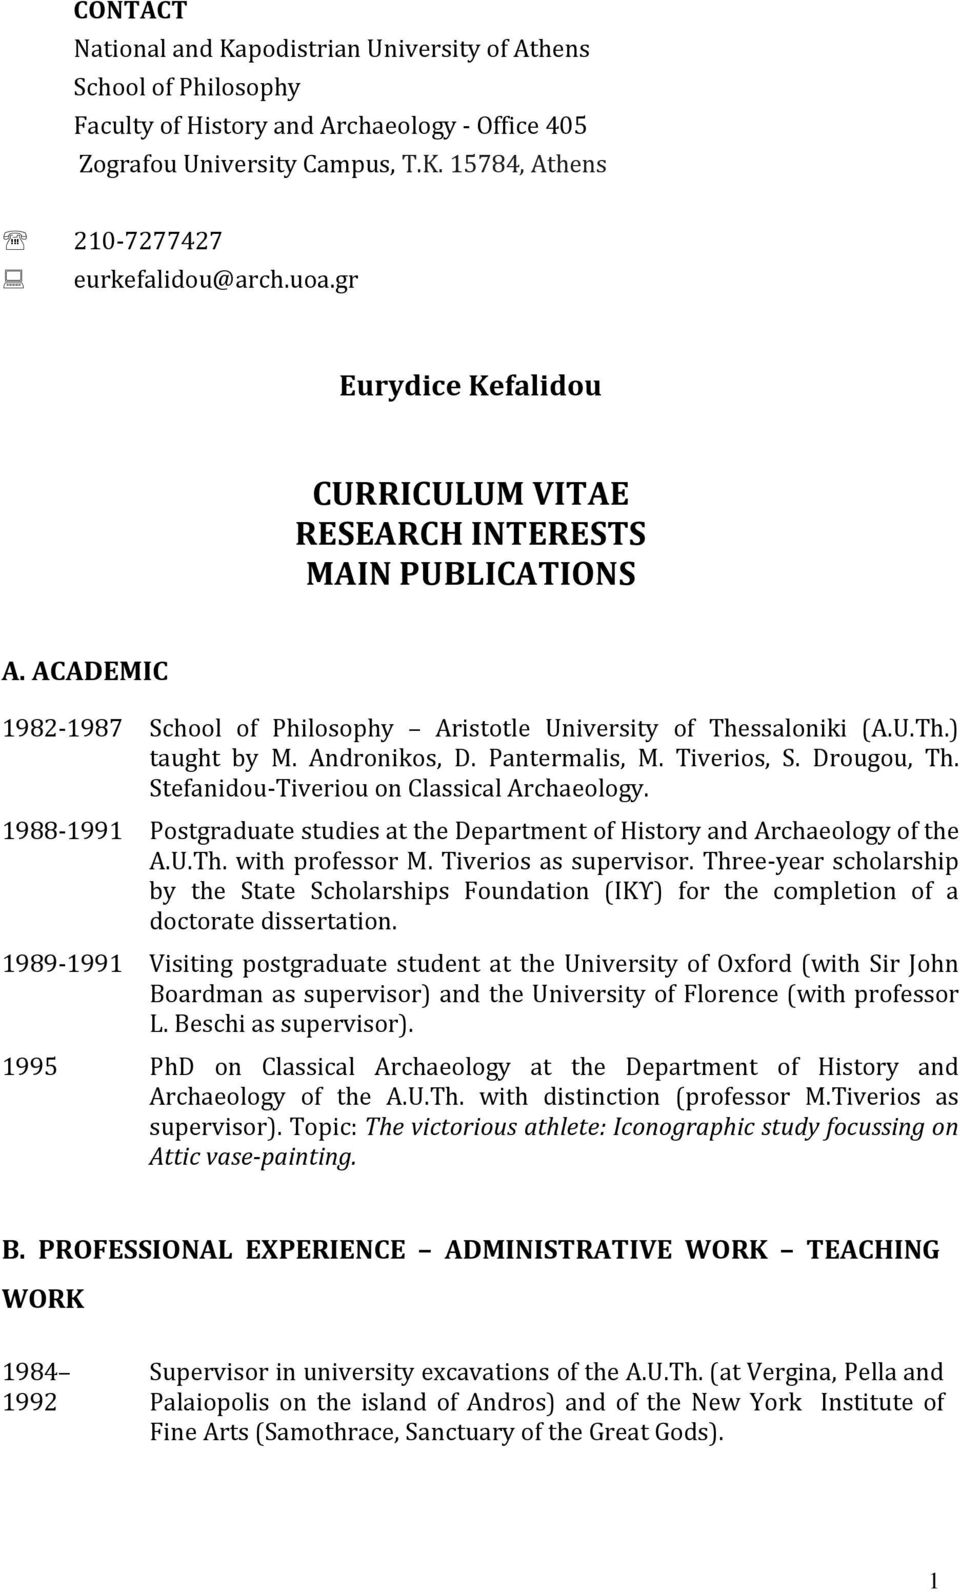 ACADEMIC 1982-1987 School of Philosophy Aristotle University of Thessaloniki (A.U.Th.) taught by M. Andronikos, D. Pantermalis, M. Tiverios, S. Drougou, Th.